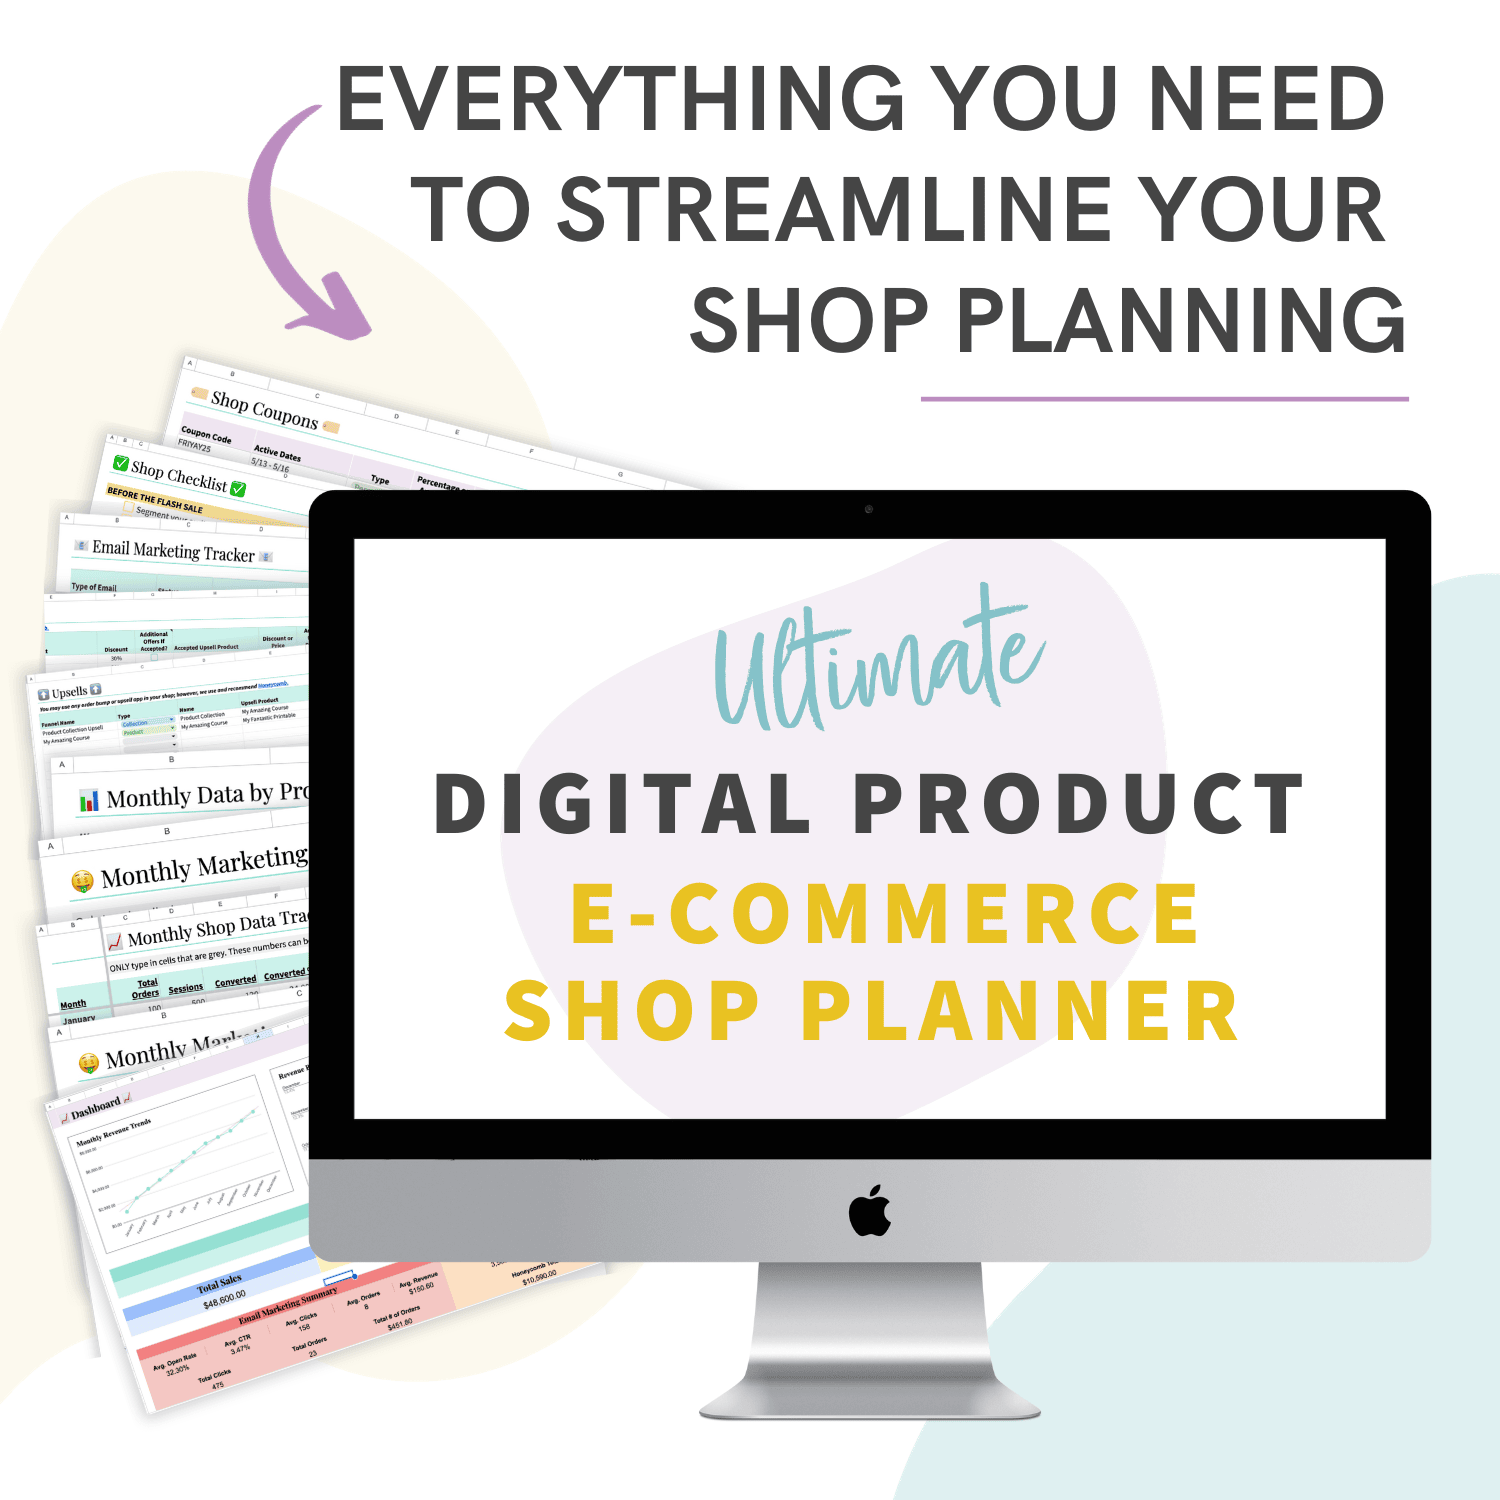 mockup of the ultimate digital product e-commerce shop planner track your shop listings, email marketing, flash sales, and shop analytics